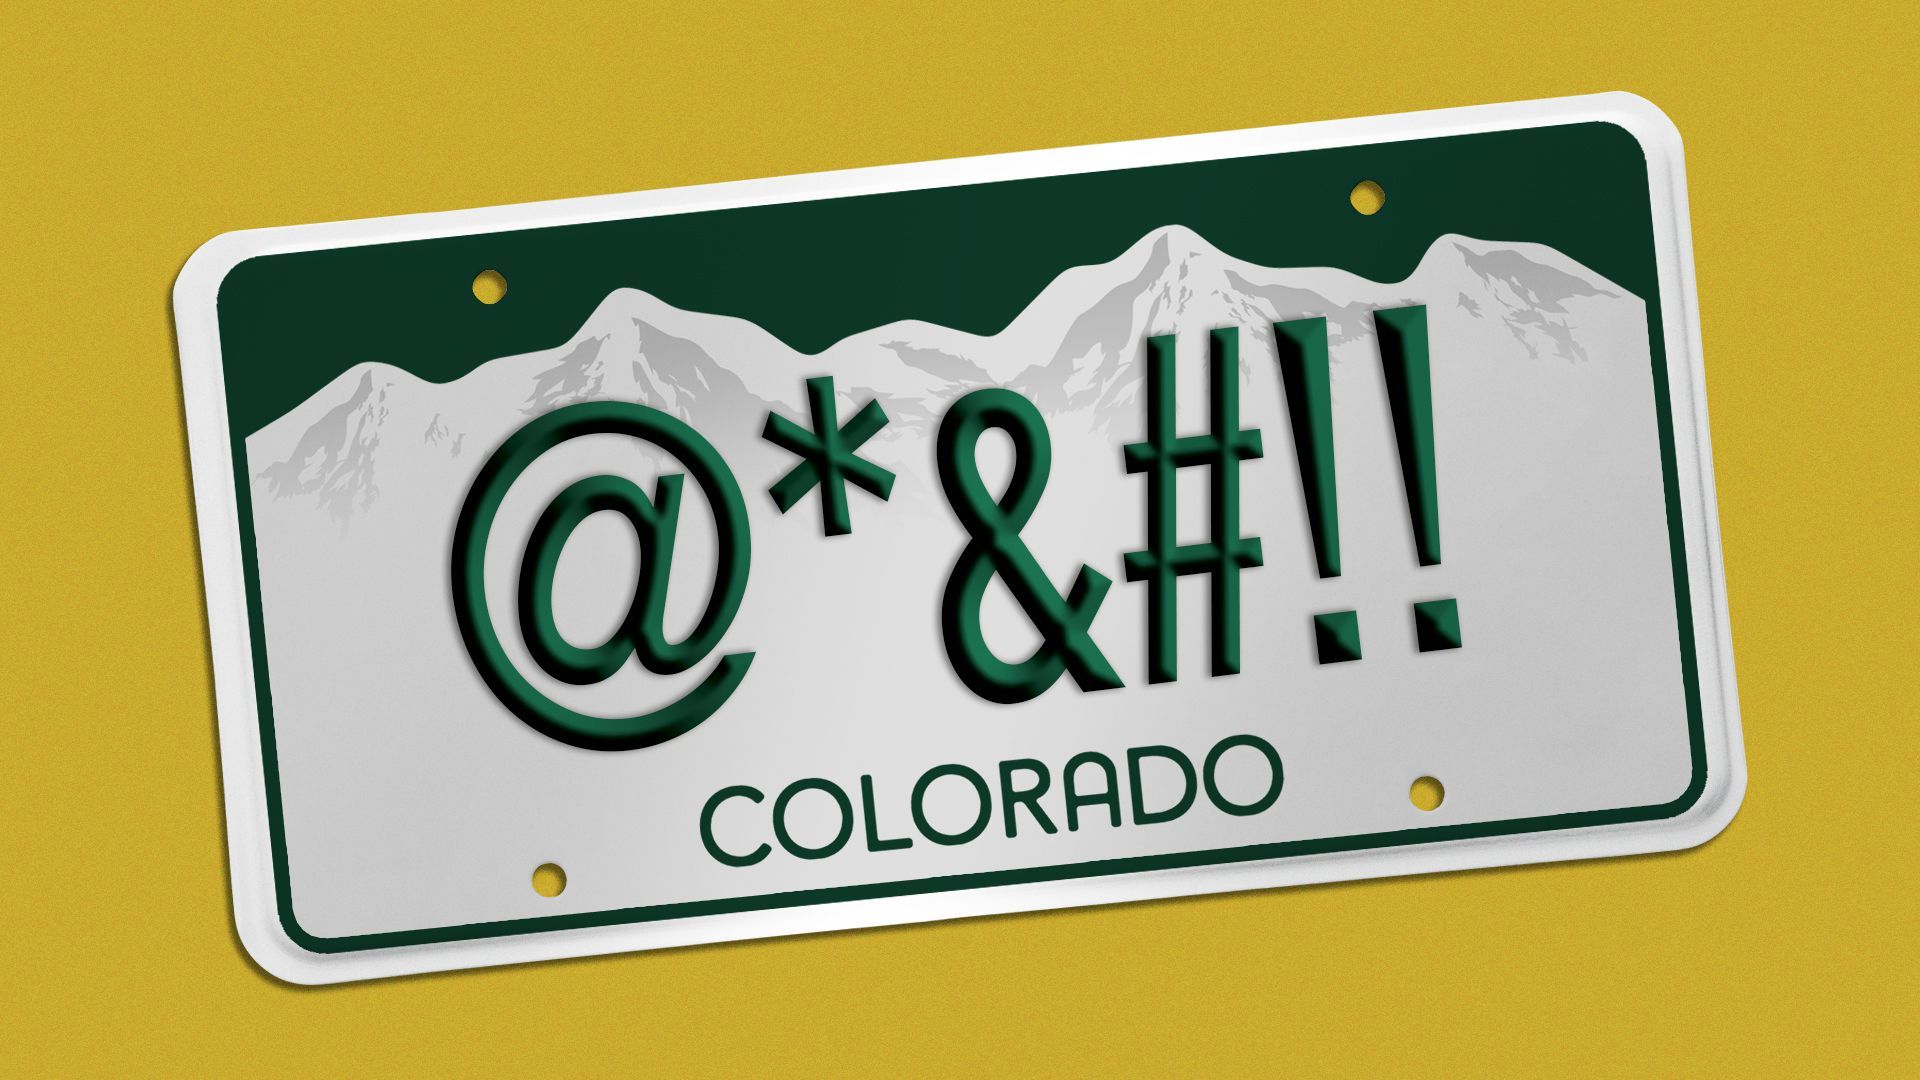 Colorado license plate with symbols implying a swear word.